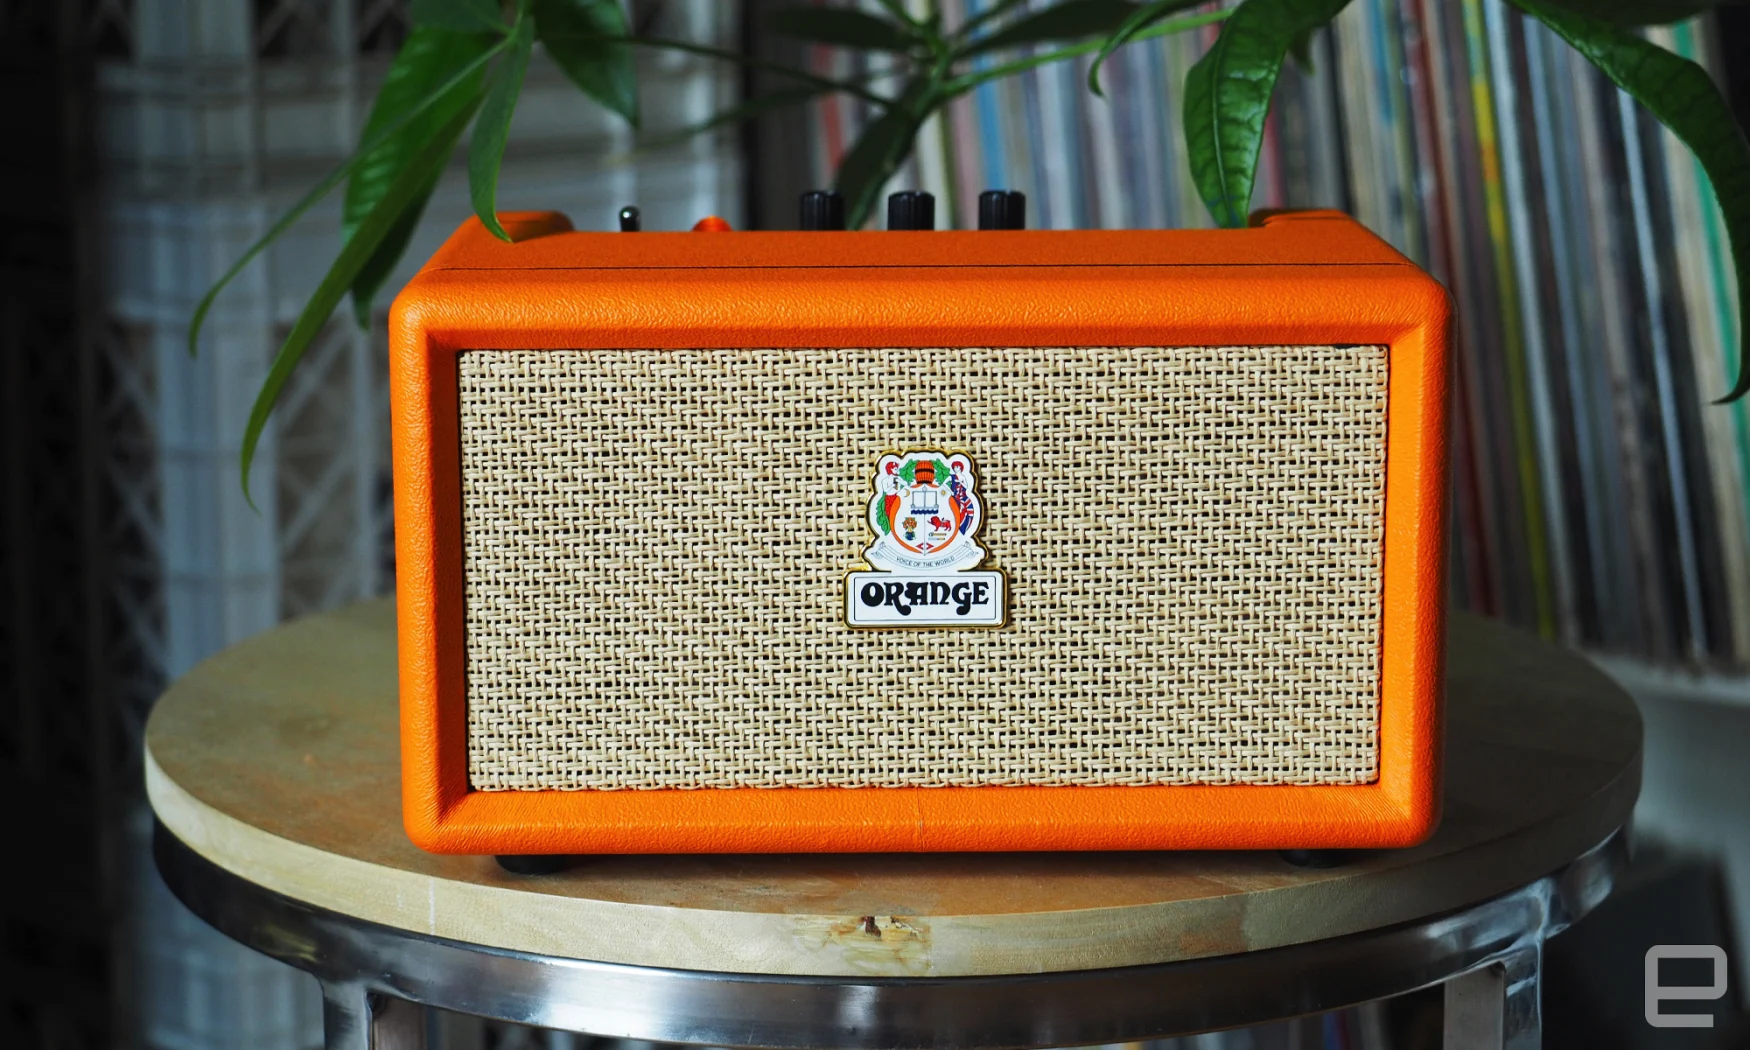 The Orange Amps - Orange Box Bluetooth speaker seen indoors on a round table with a green plant behind it.